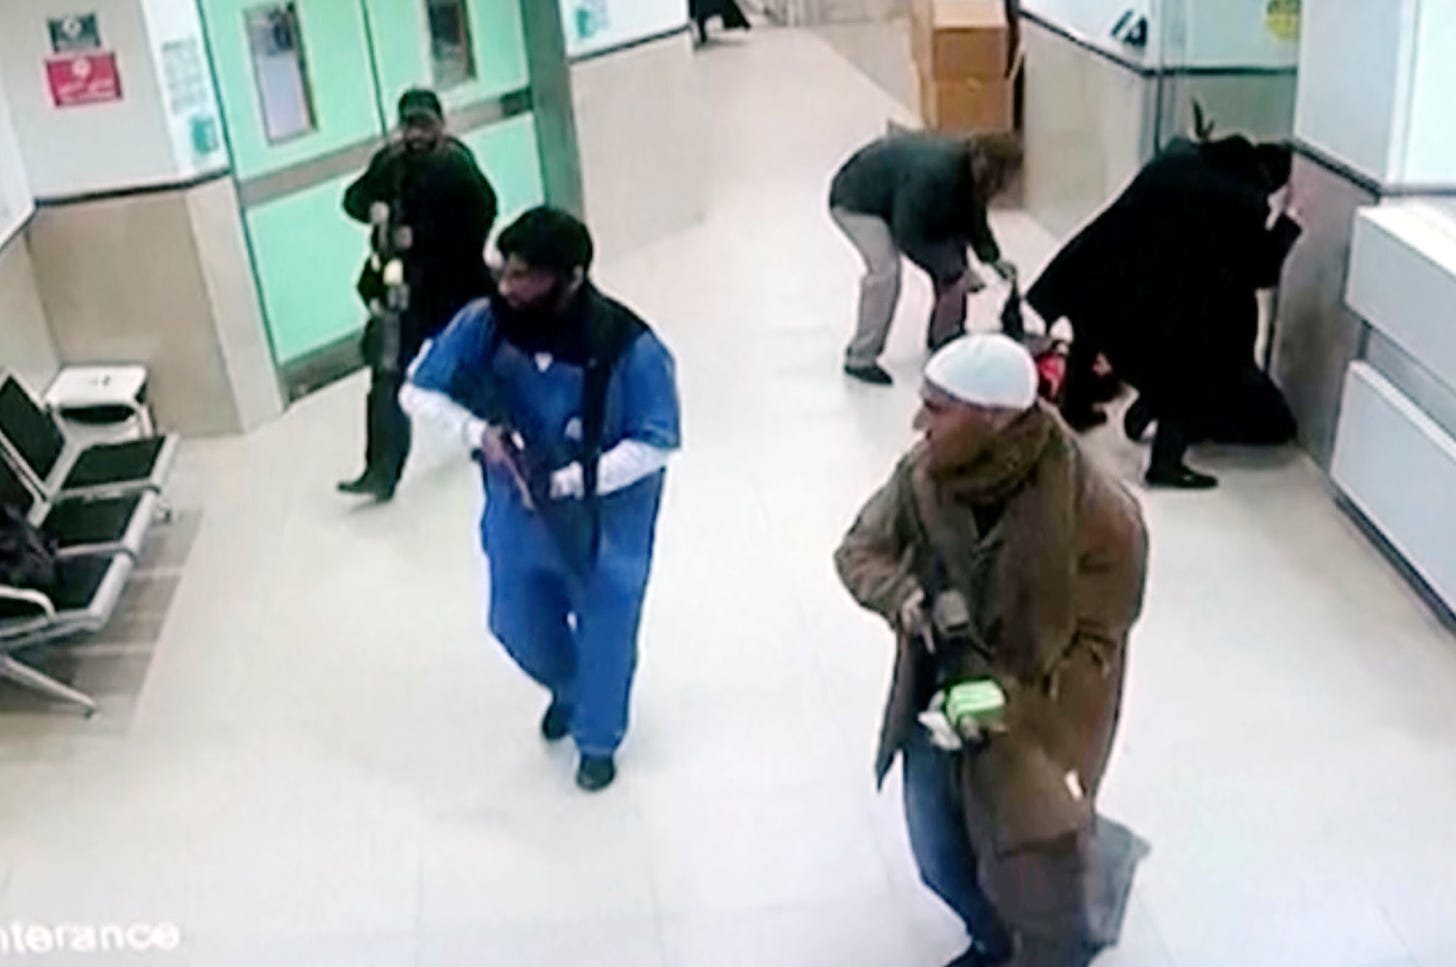 Still from surveillance video showing three armed men dressed as civilians and a hospital worker in a hospital hallway.